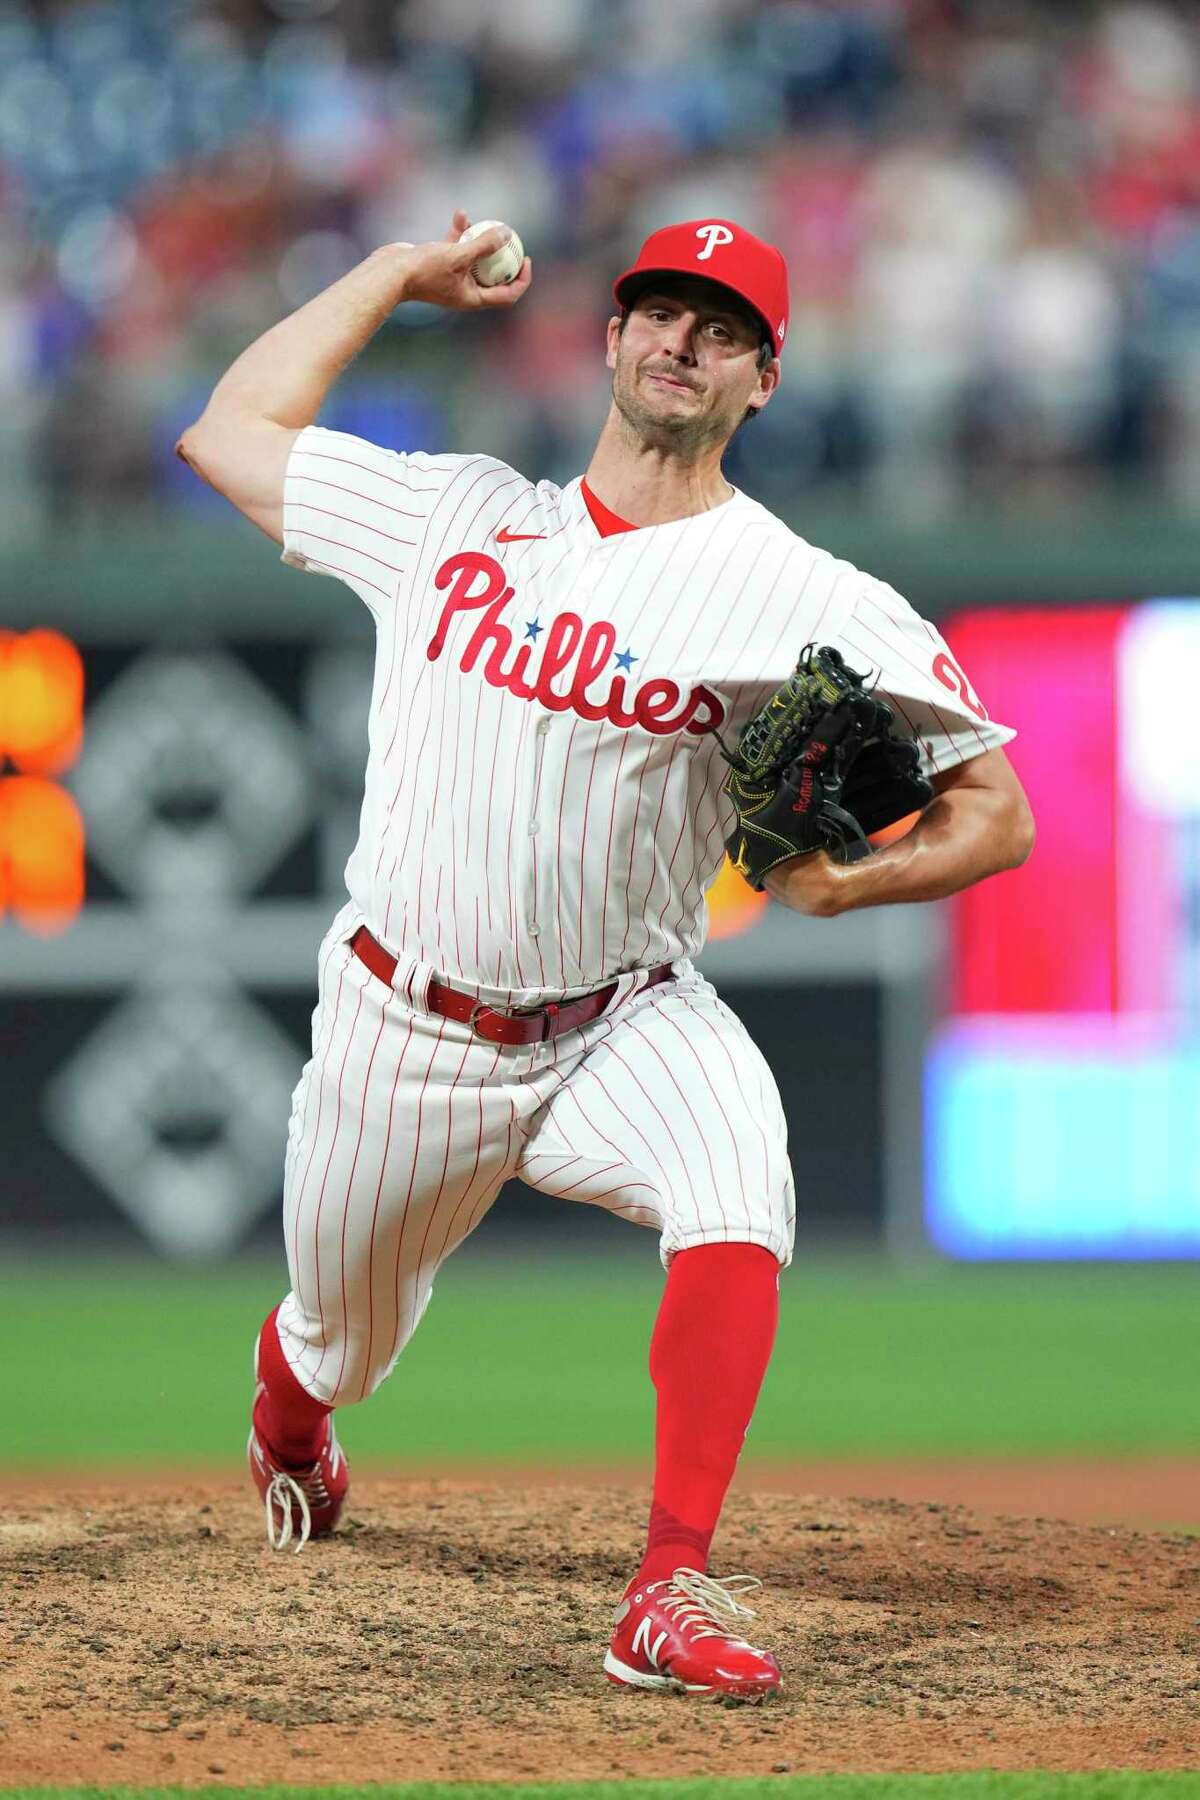 PHILADELPHIA, PA - JUNE 29: Mark Appel #22 of the Philadelphia Phillies throws a pitch in the top of the ninth inning against the Atlanta Braves at Citizens Bank Park on June 29, 2022 in Philadelphia, Pennsylvania. The Braves defeated the Phillies 4-1. (Photo by Mitchell Leff/Getty Images)